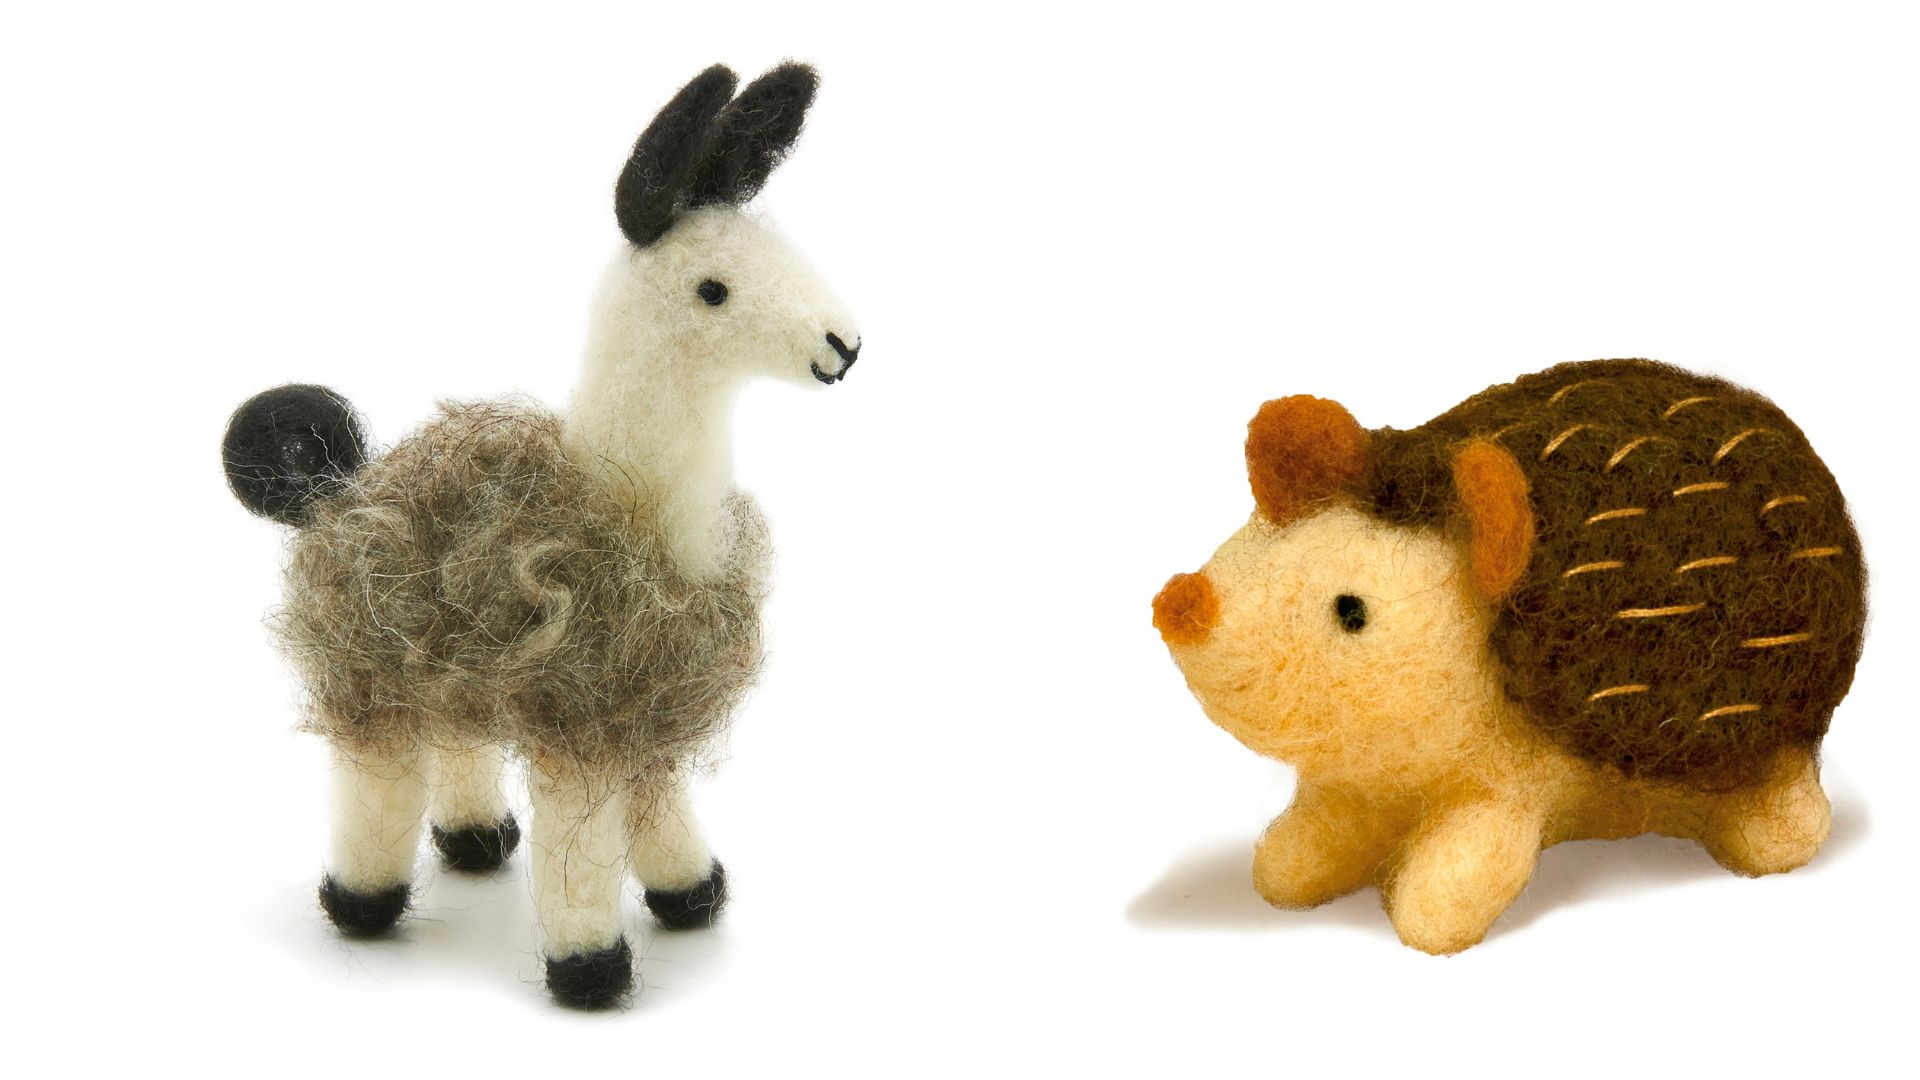 Create your own needle felted llama and hedgehog animal toys